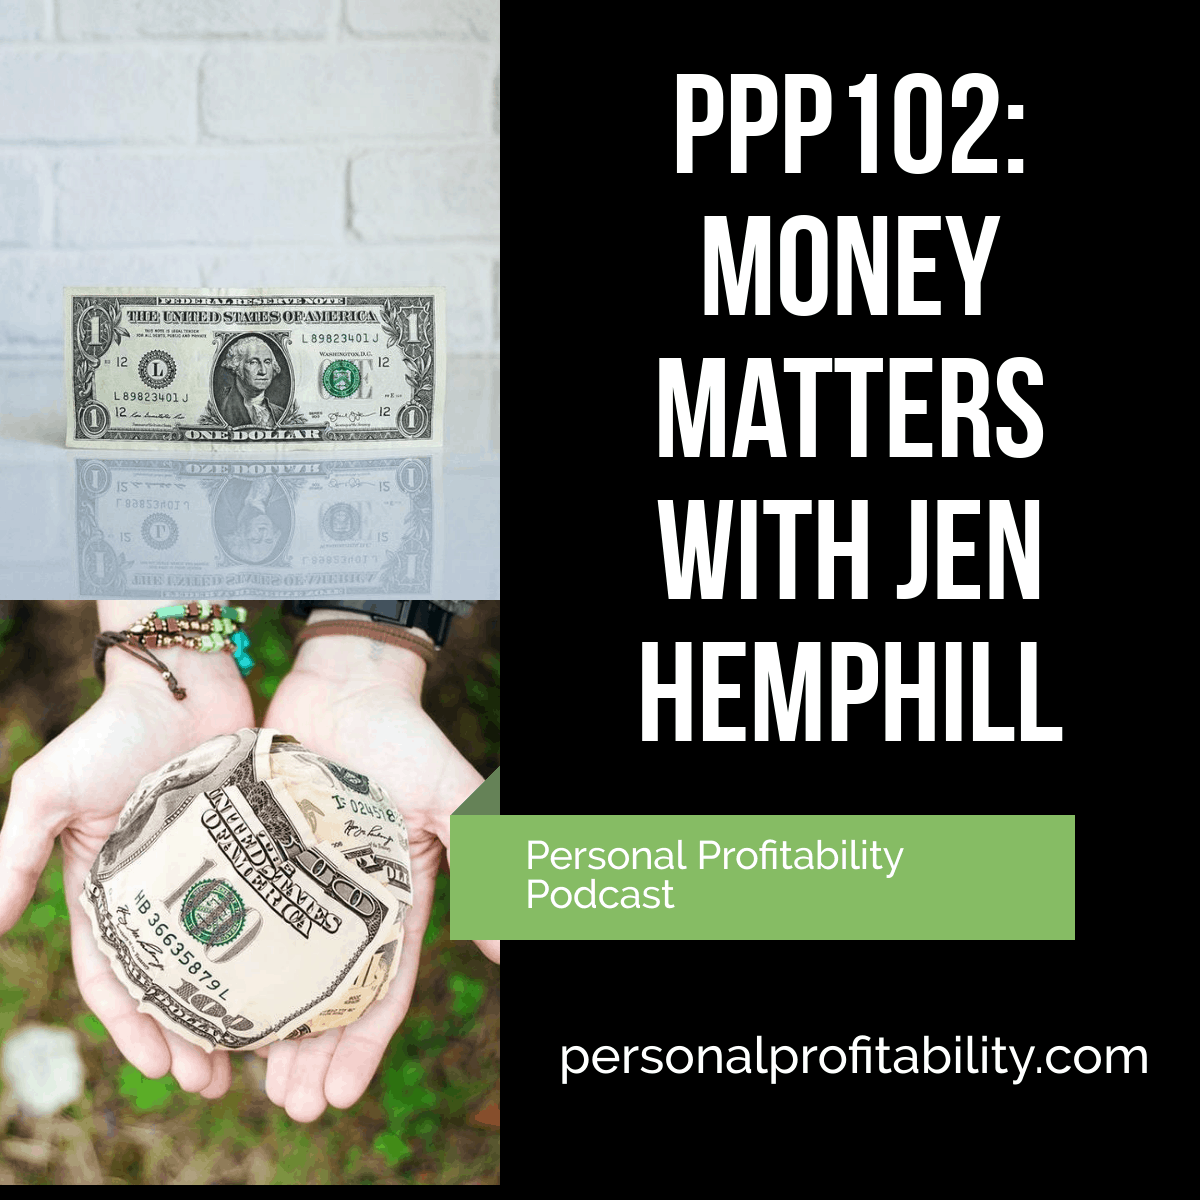 Today's guest, Jen Hemphill, is a podcaster and author who focuses on "financial truth" primarily for women. In addition to being a military spouse and a bilingual Latina, Jen is passionate about helping women (and men) get their finances on track with their dreams. 